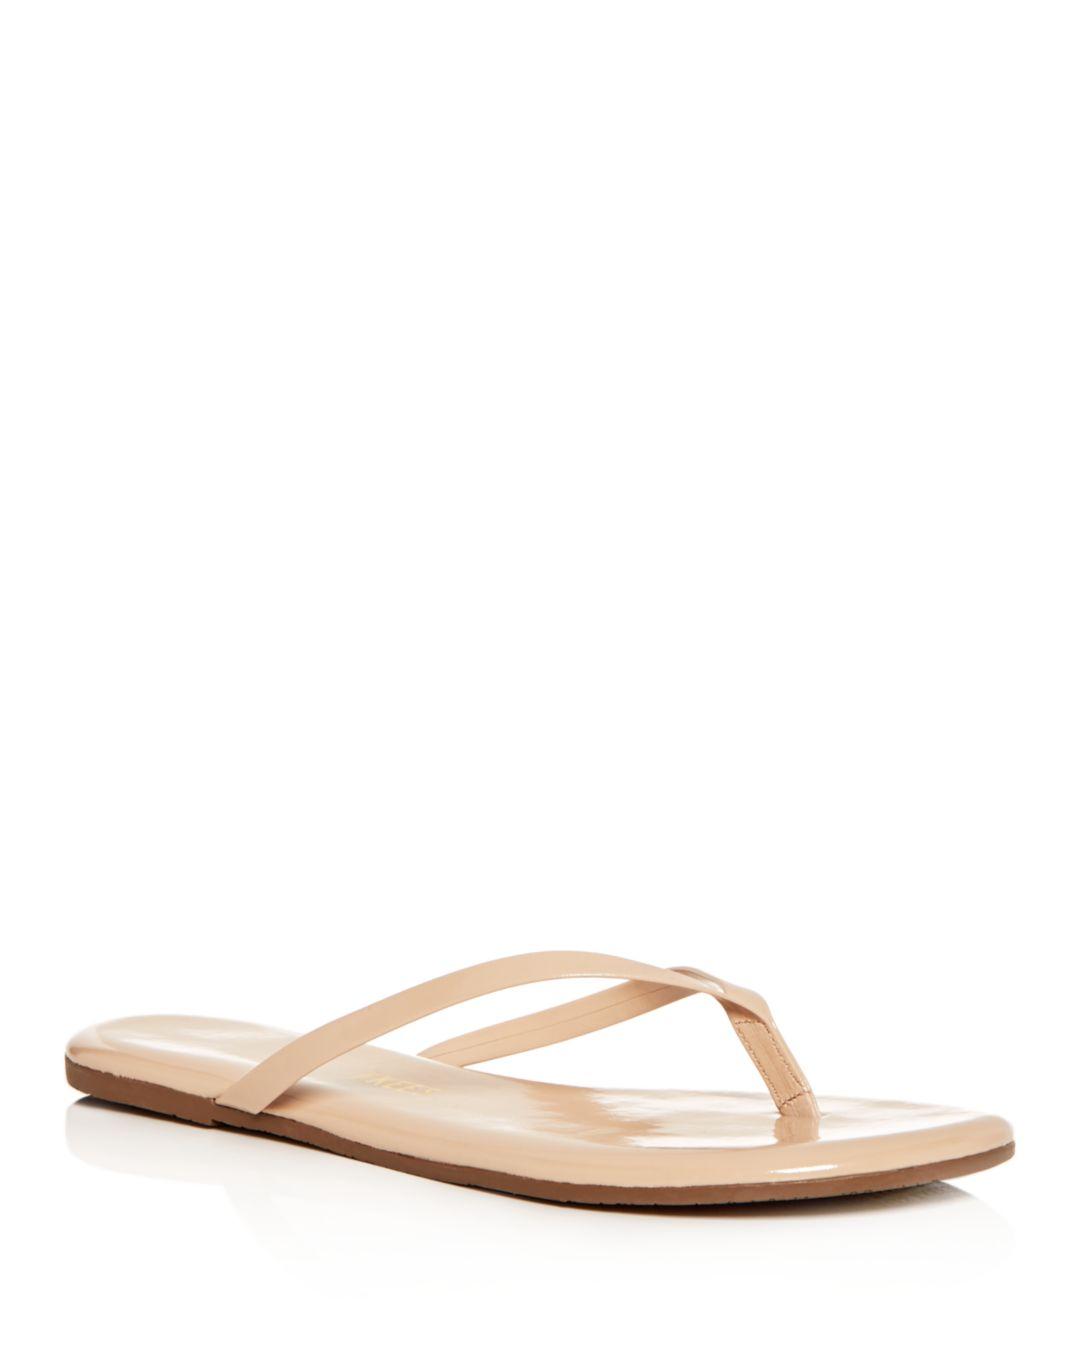 TKEES Women's Glosses Patent Leather Flip - Flops - Lyst